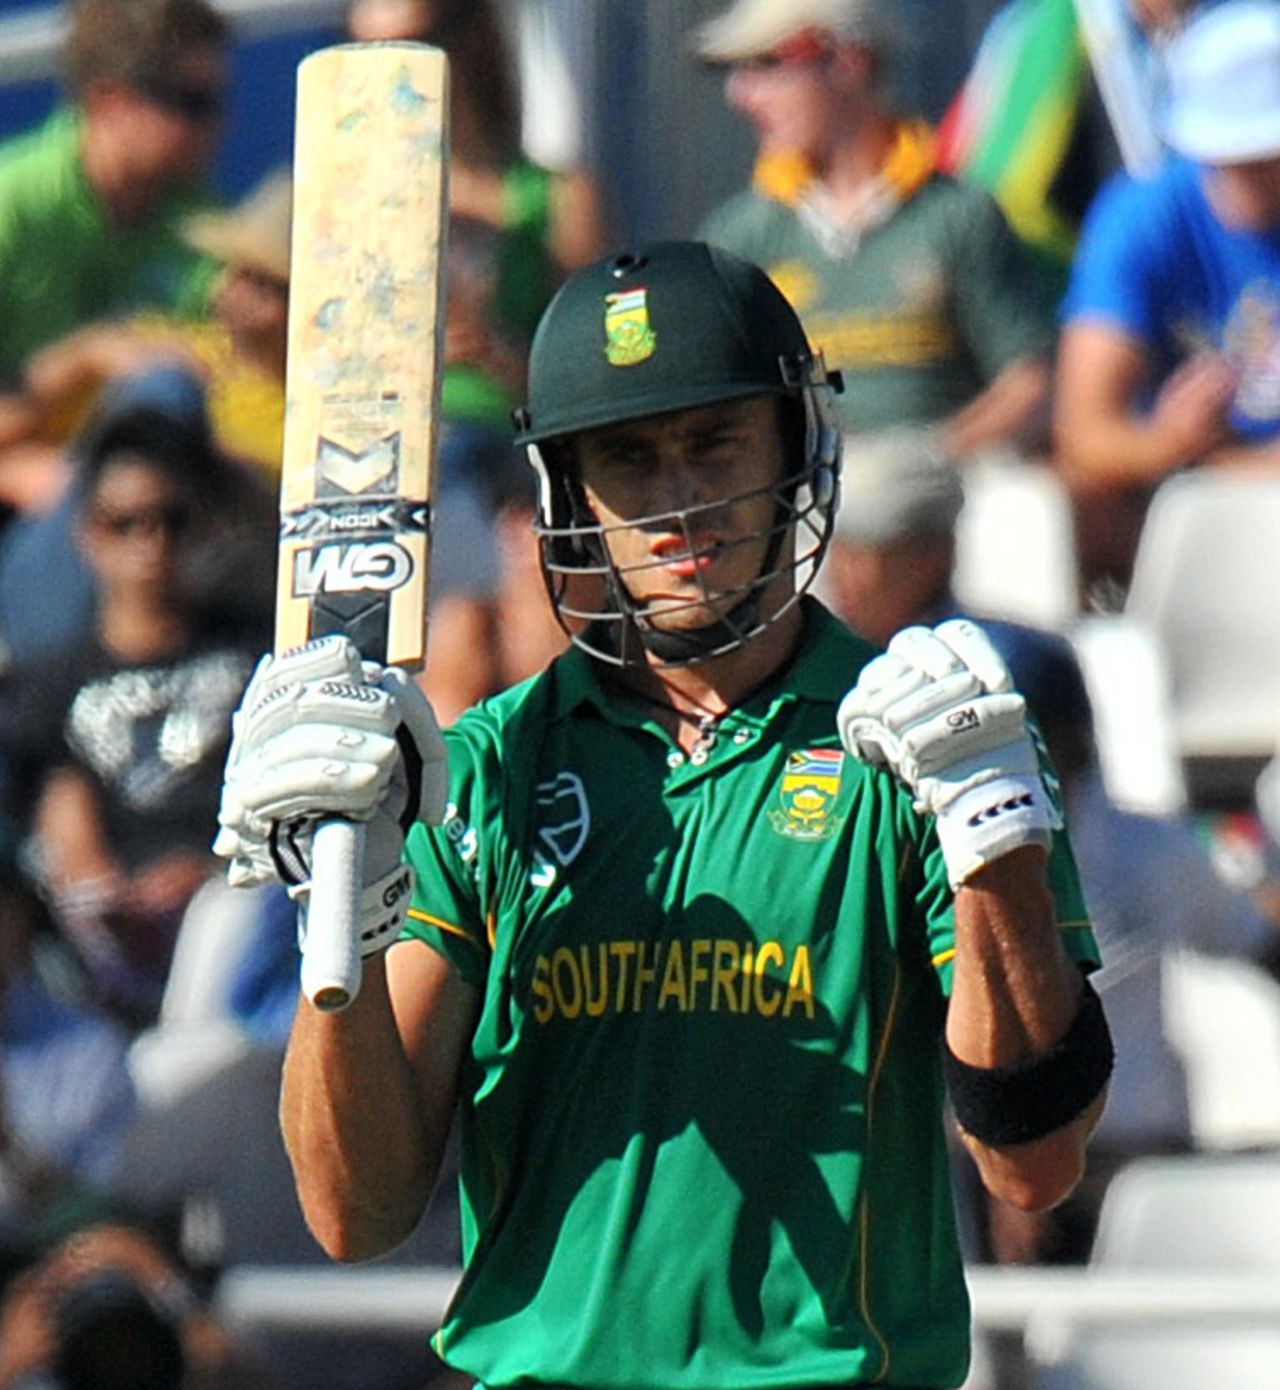 Faf du Plessis signals a half-century on debut, South Africa v India, 3rd ODI, Cape Town, January 18, 2011